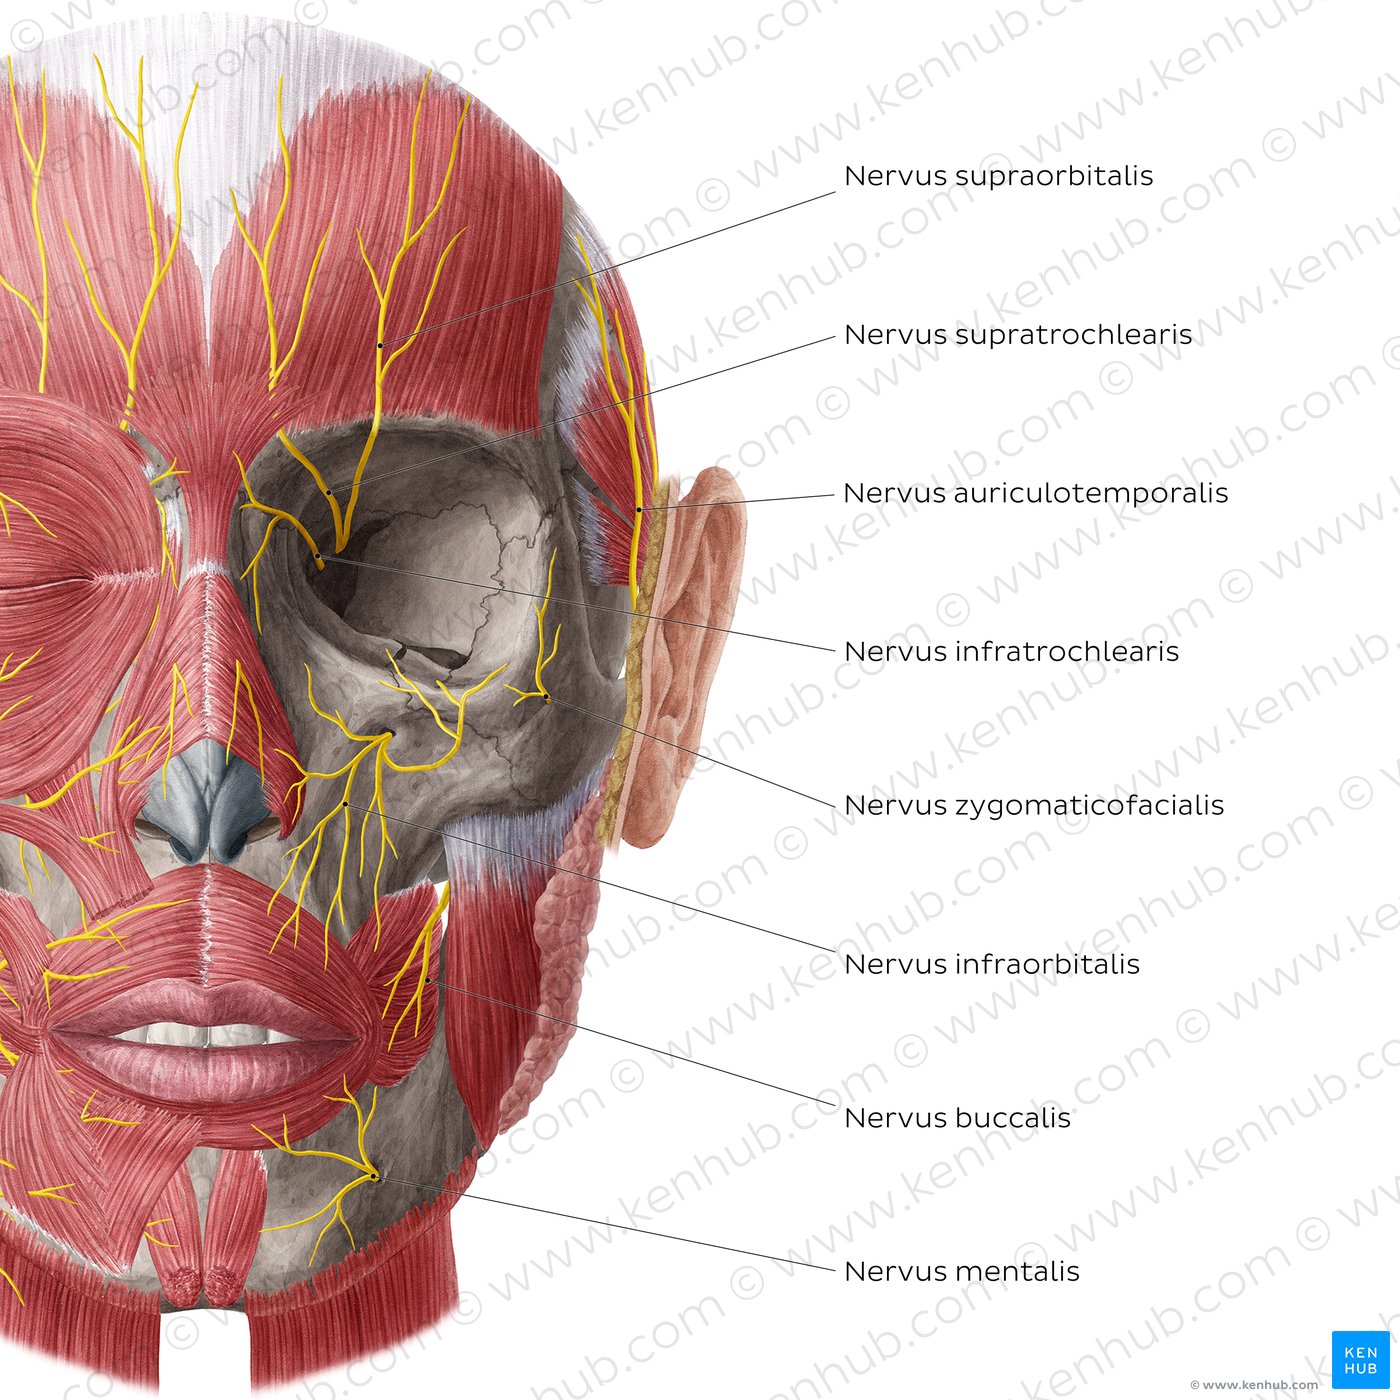 Nerves of face and scalp (Anterior: tief)